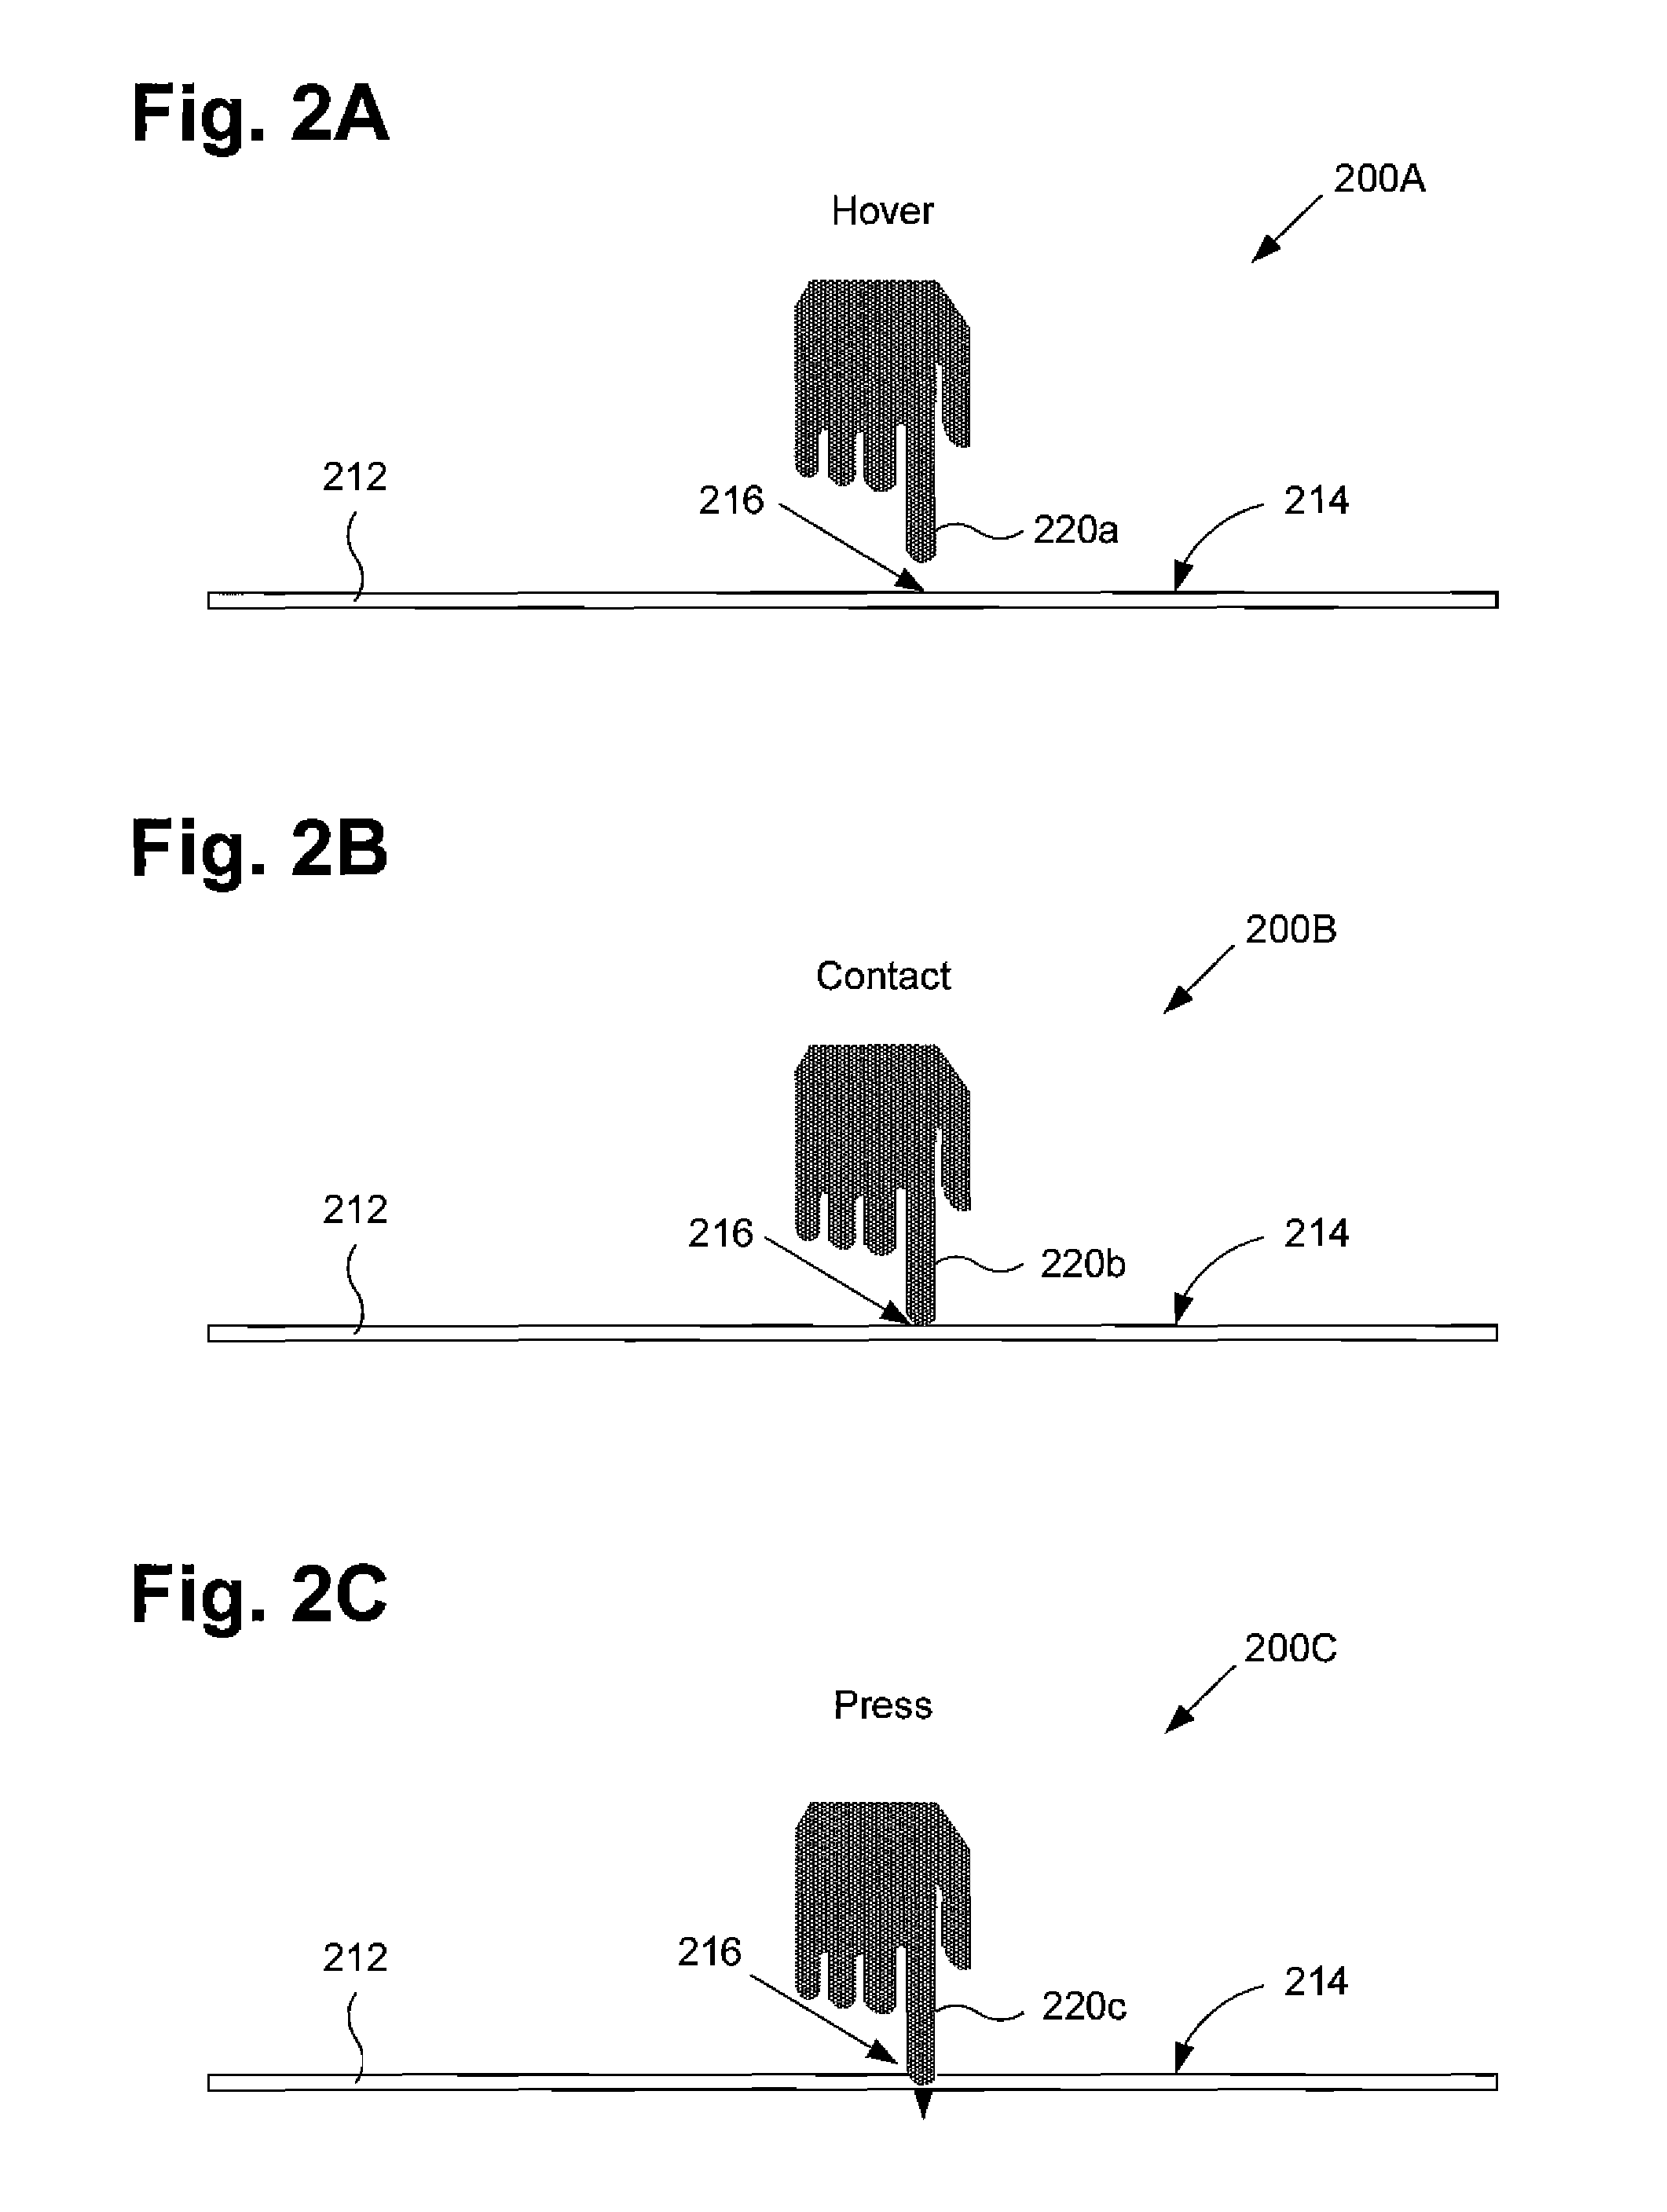 Systems and Methods for Providing Enhanced Touch Sensing